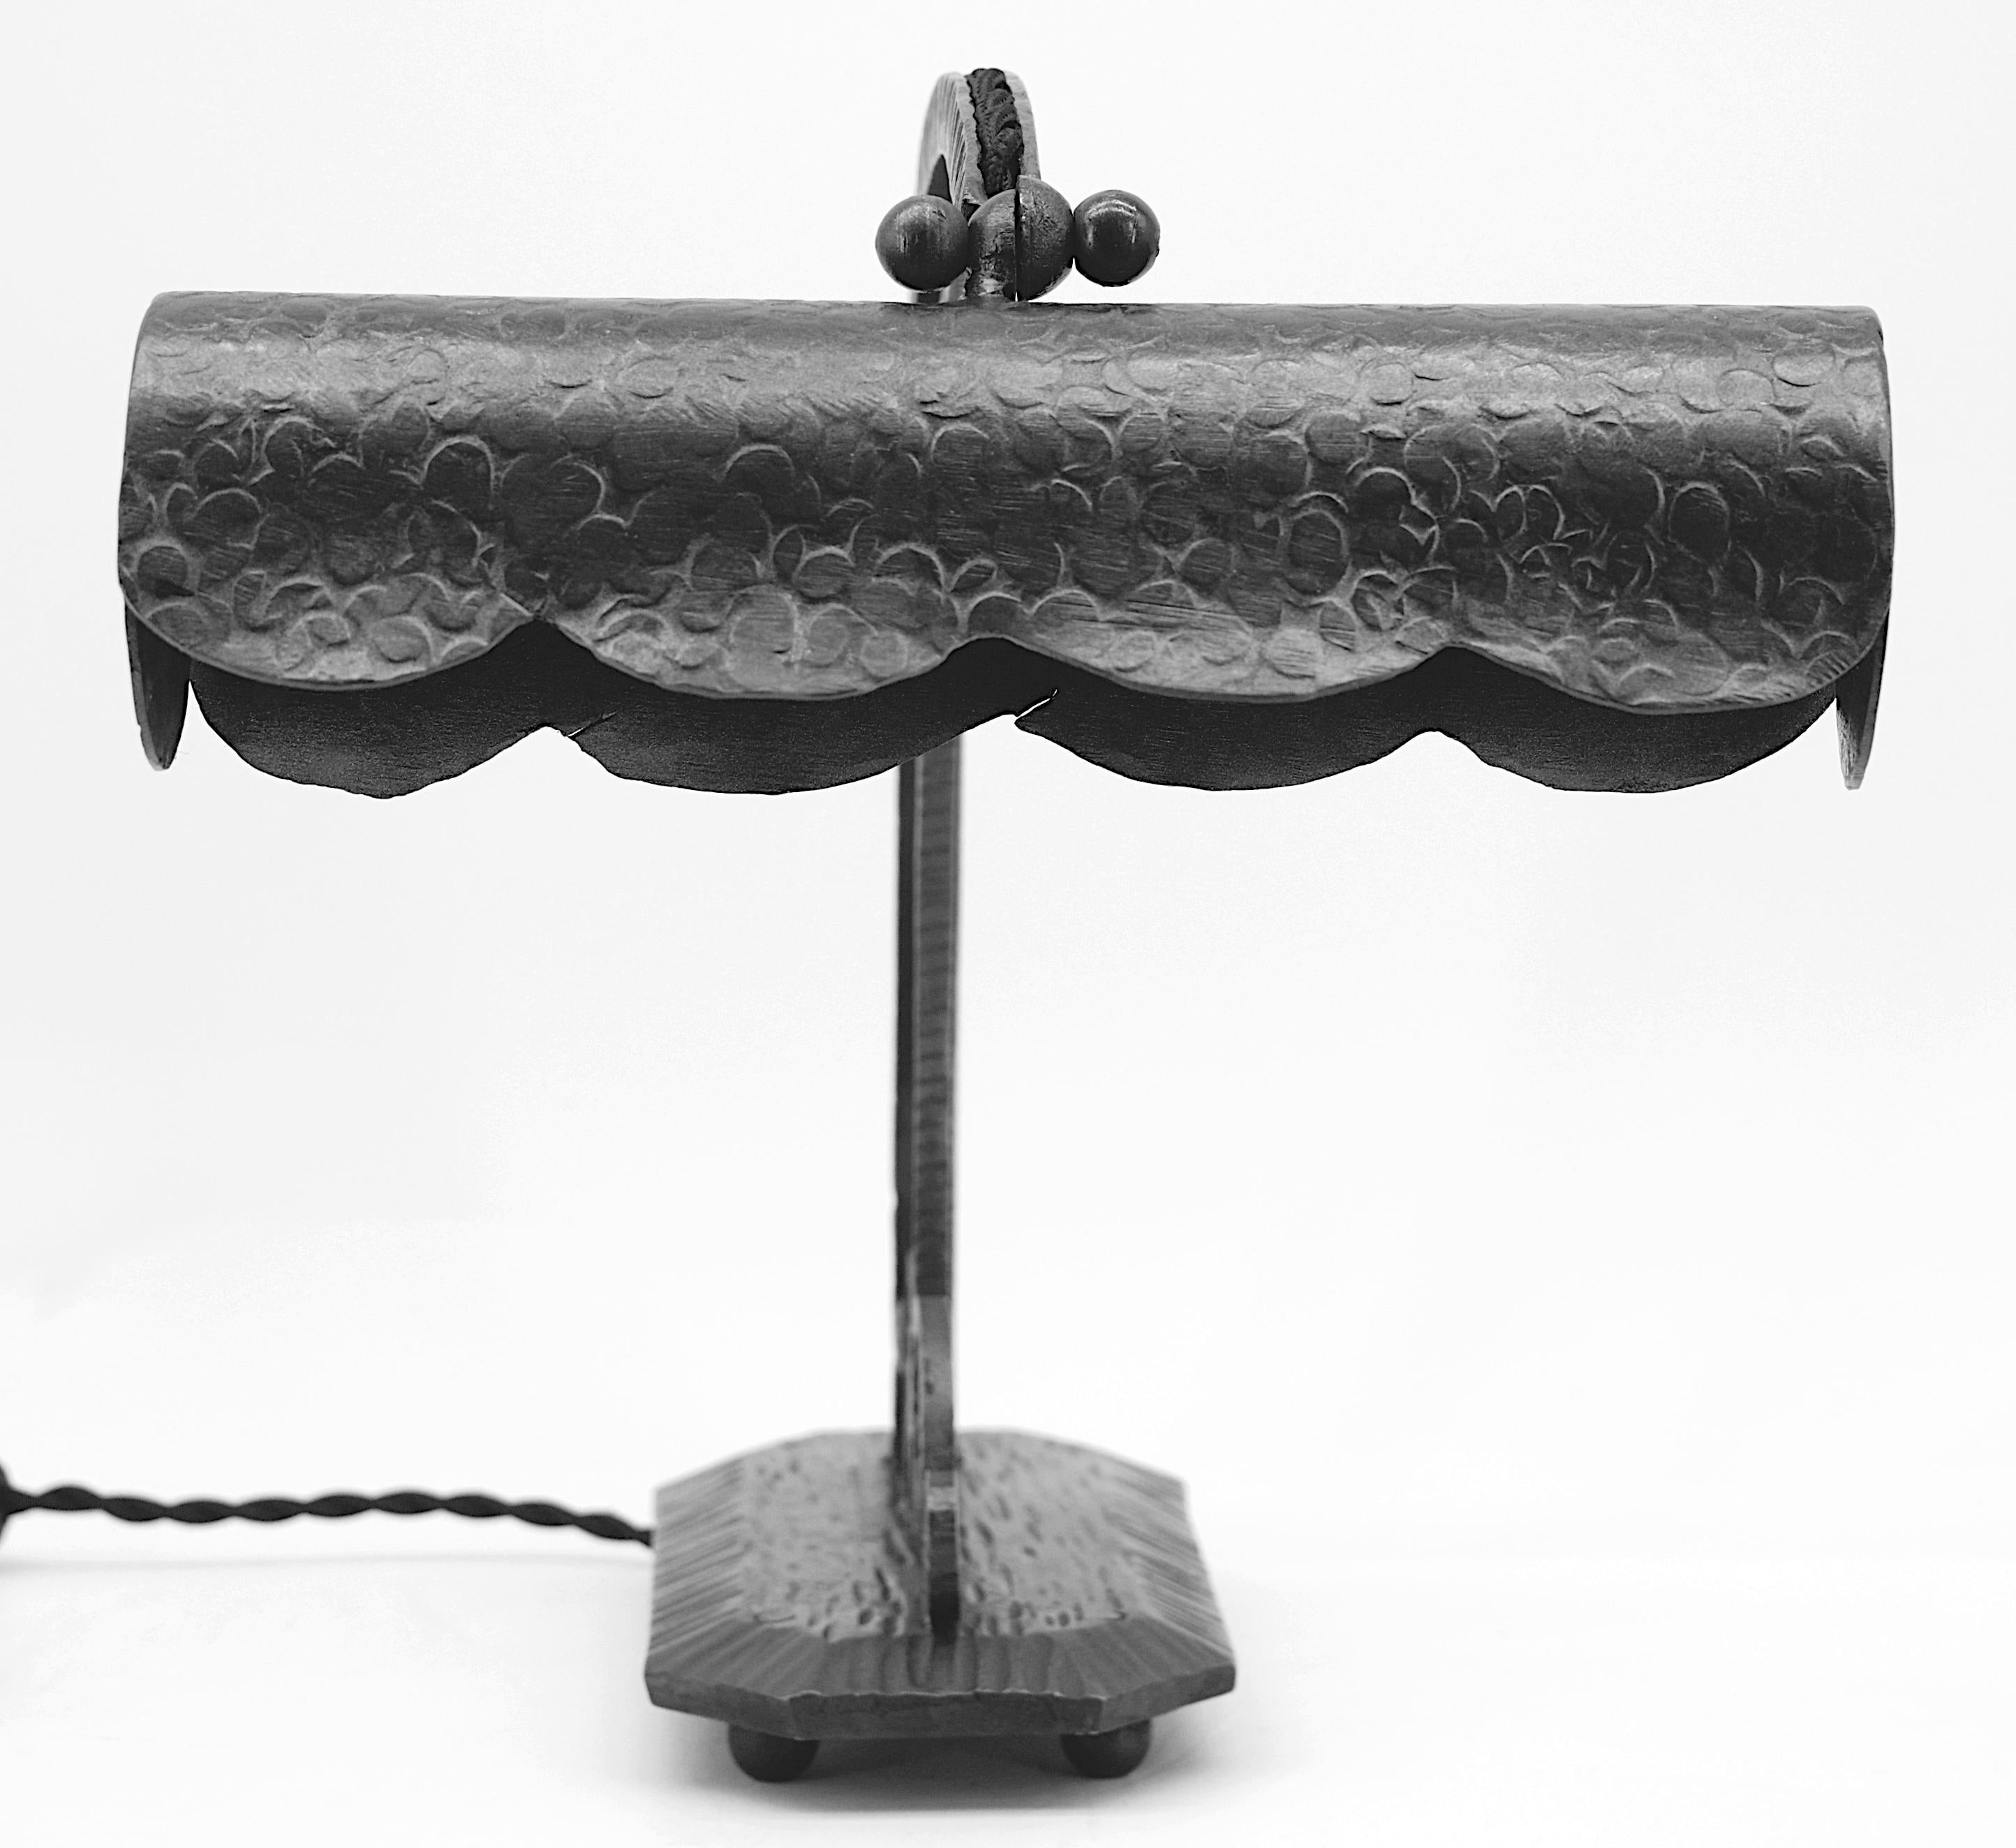 Le Fer Forge French Art Deco Piano / Desk / Table Lamp, 1920s In Good Condition For Sale In Saint-Amans-des-Cots, FR